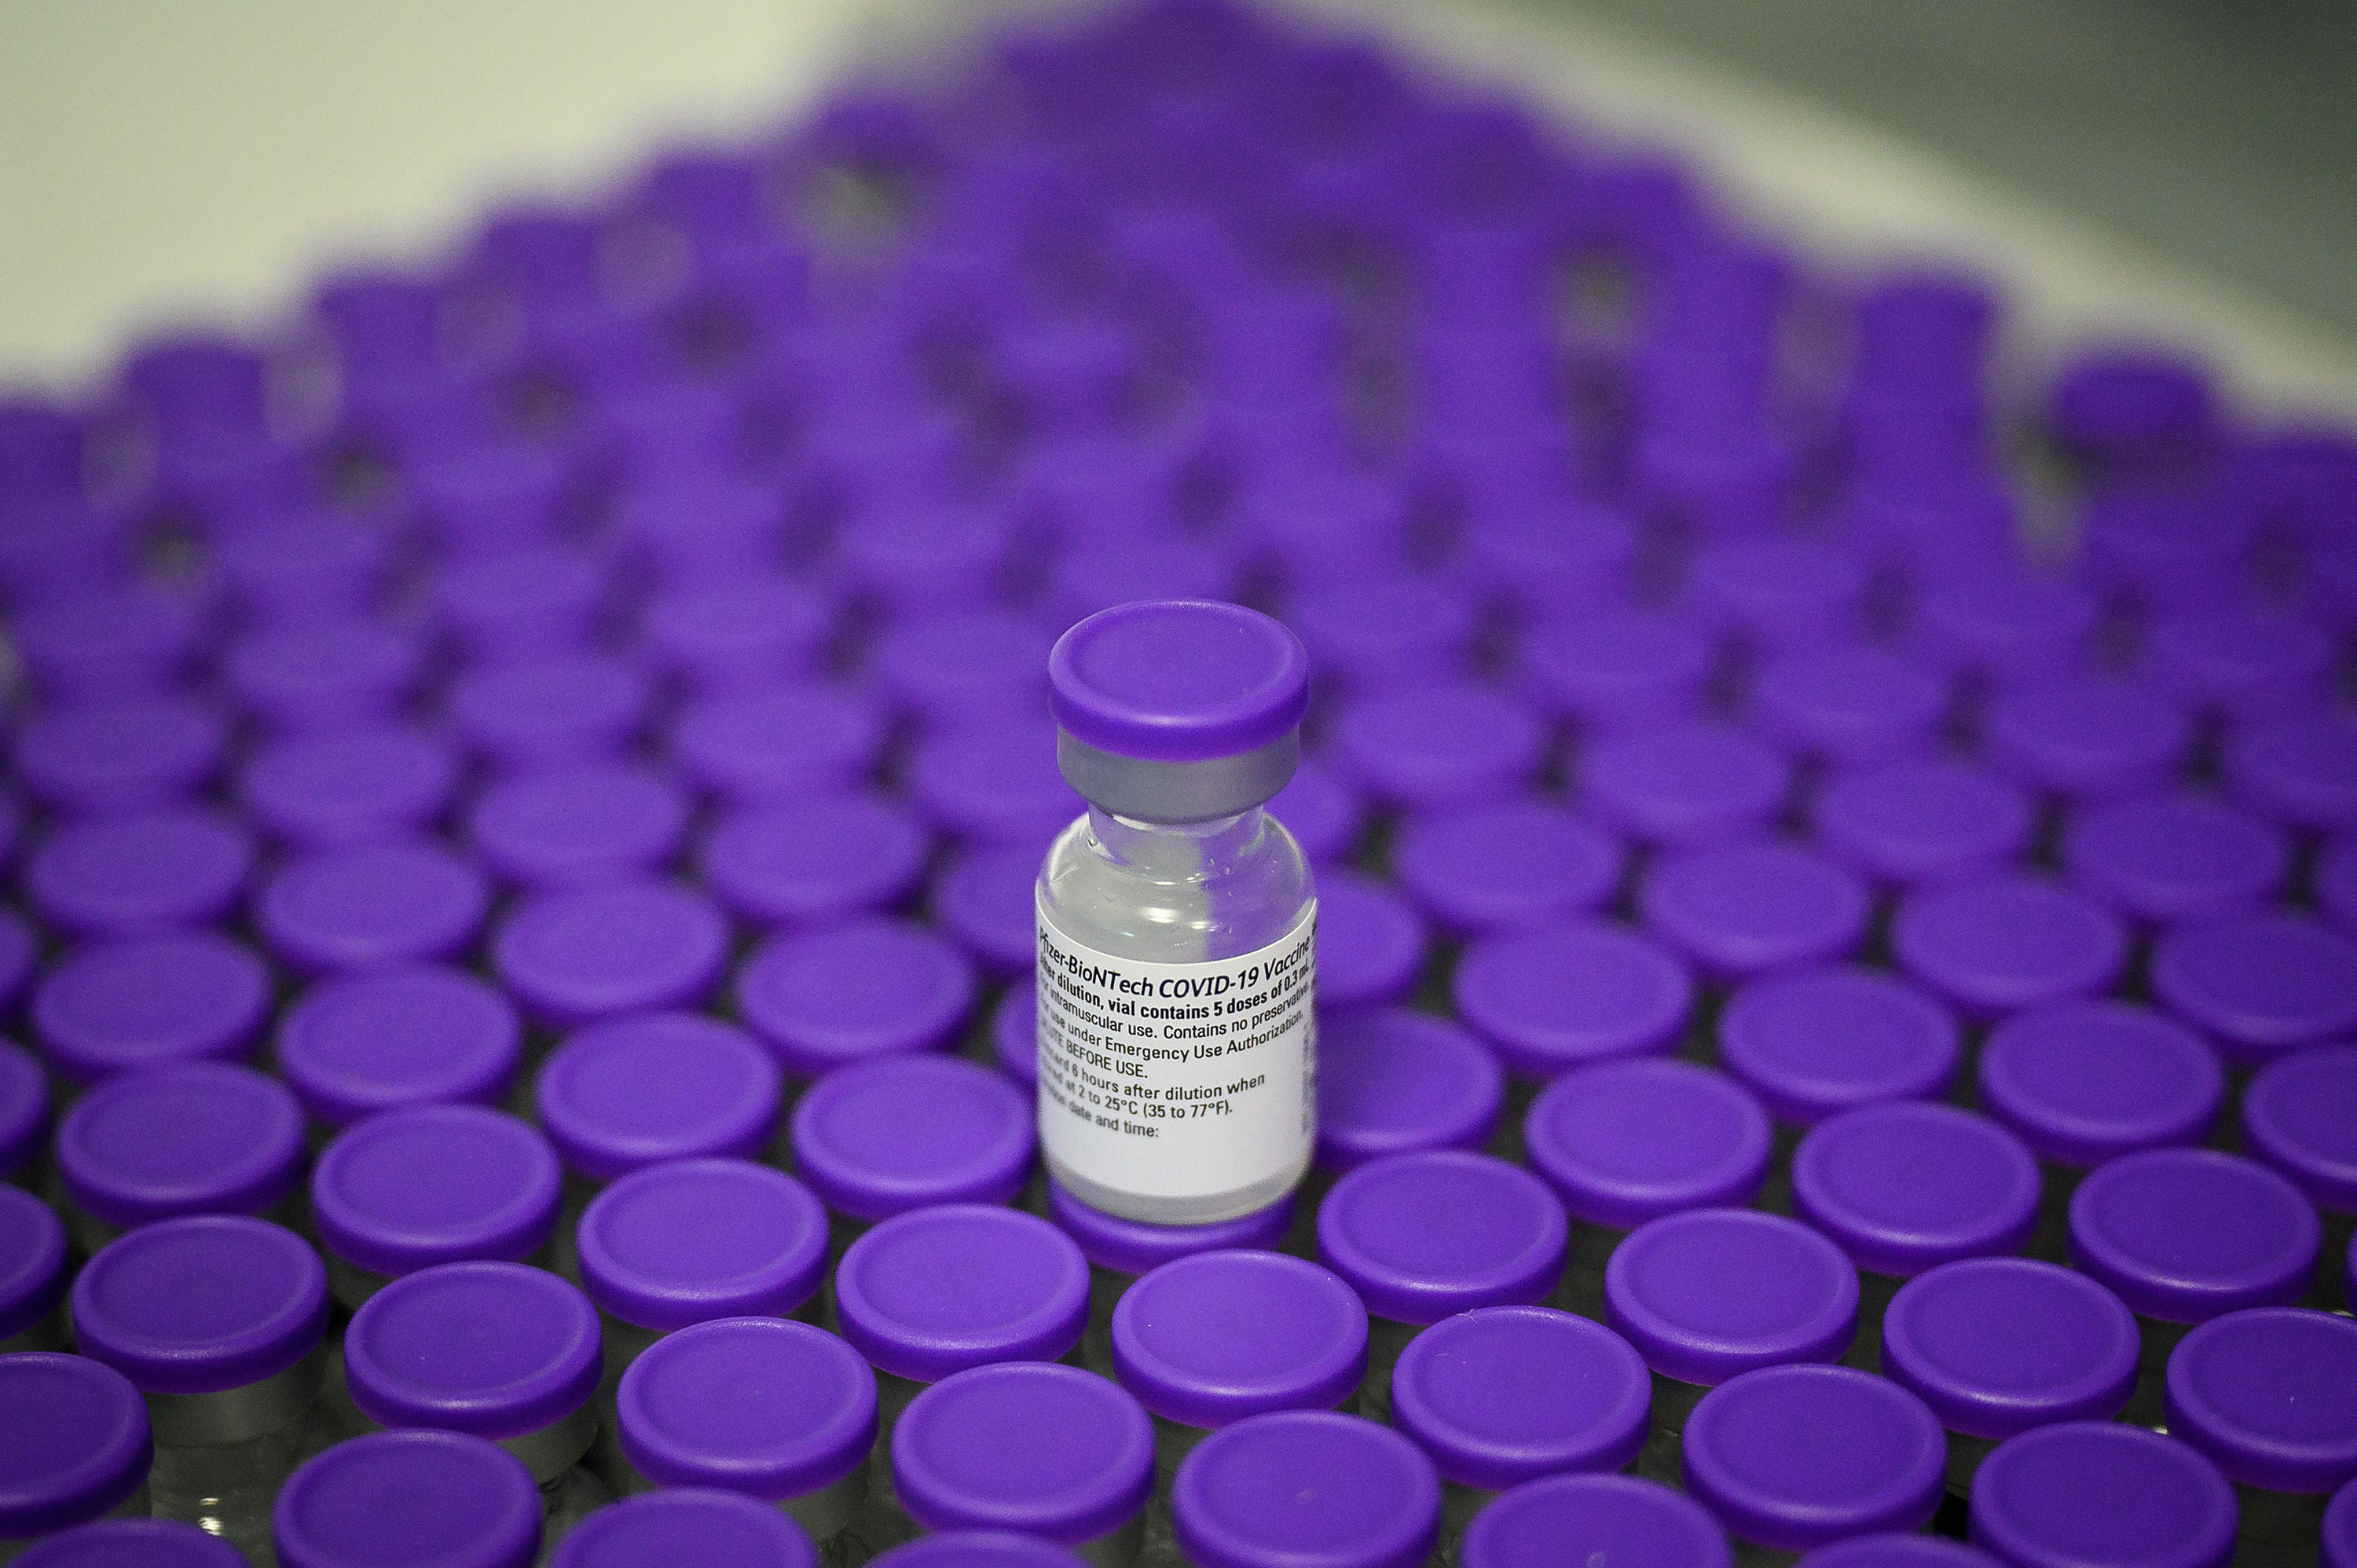 Vials of the Pfizer Covid-19 vaccine are seen in December 2020.